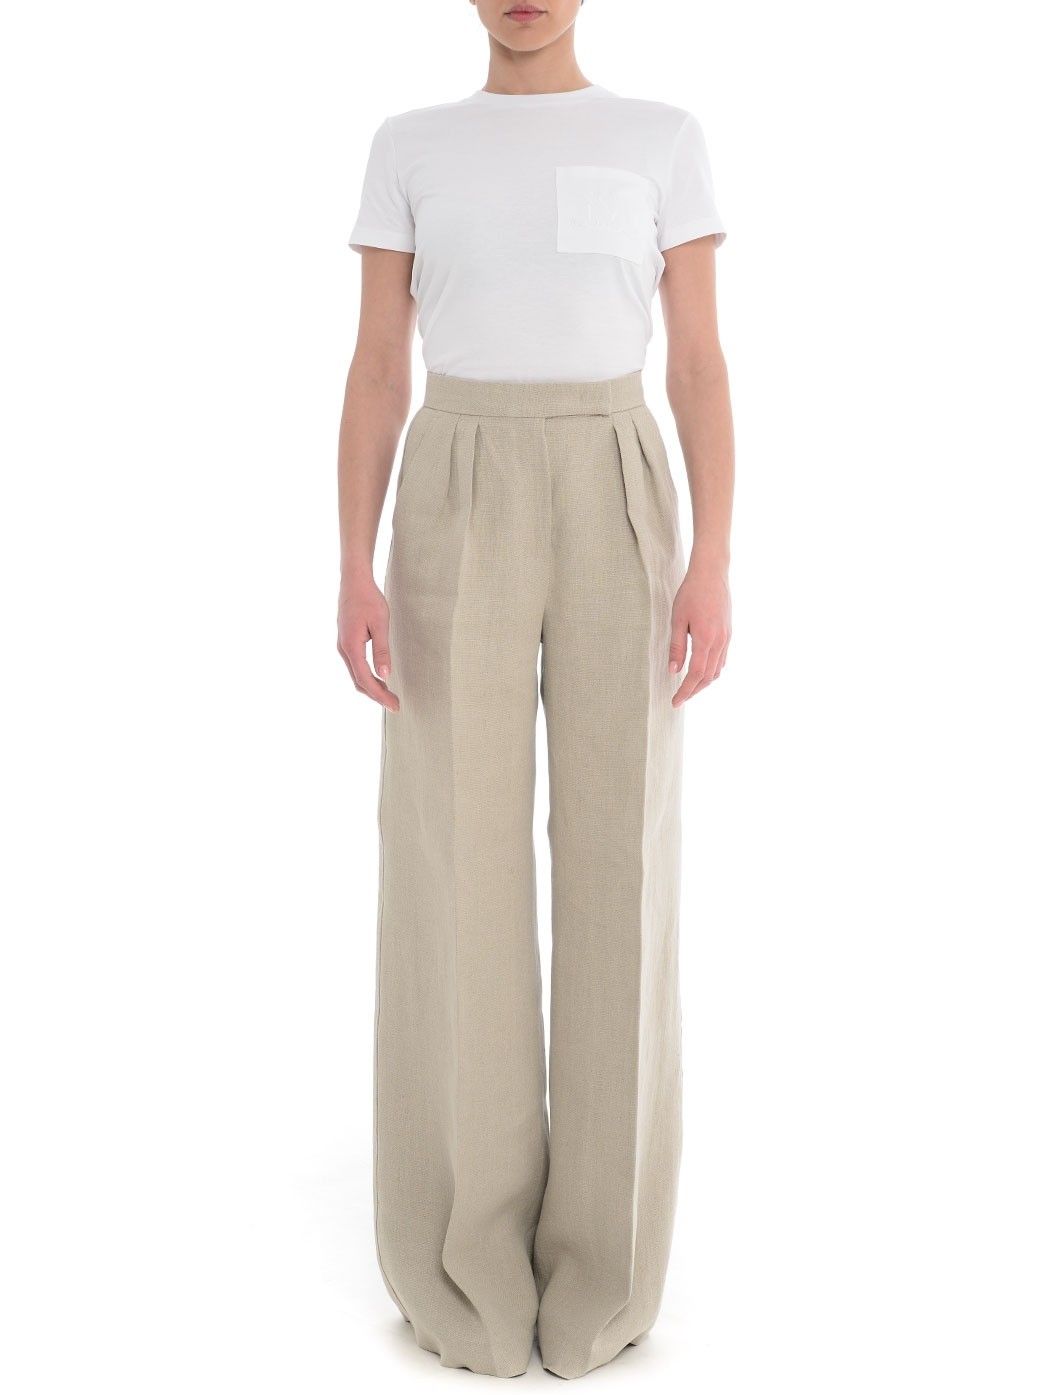  WOMAN TROUSERS,PALAZZO TROUSERS,SKINNY TROUSERS,MARNI TROUSERS,FORTE FORTE TROUSERS,8PM TROUSERS,MSGM TROUSERS,CROP PANTS  MAX MARA CADEN